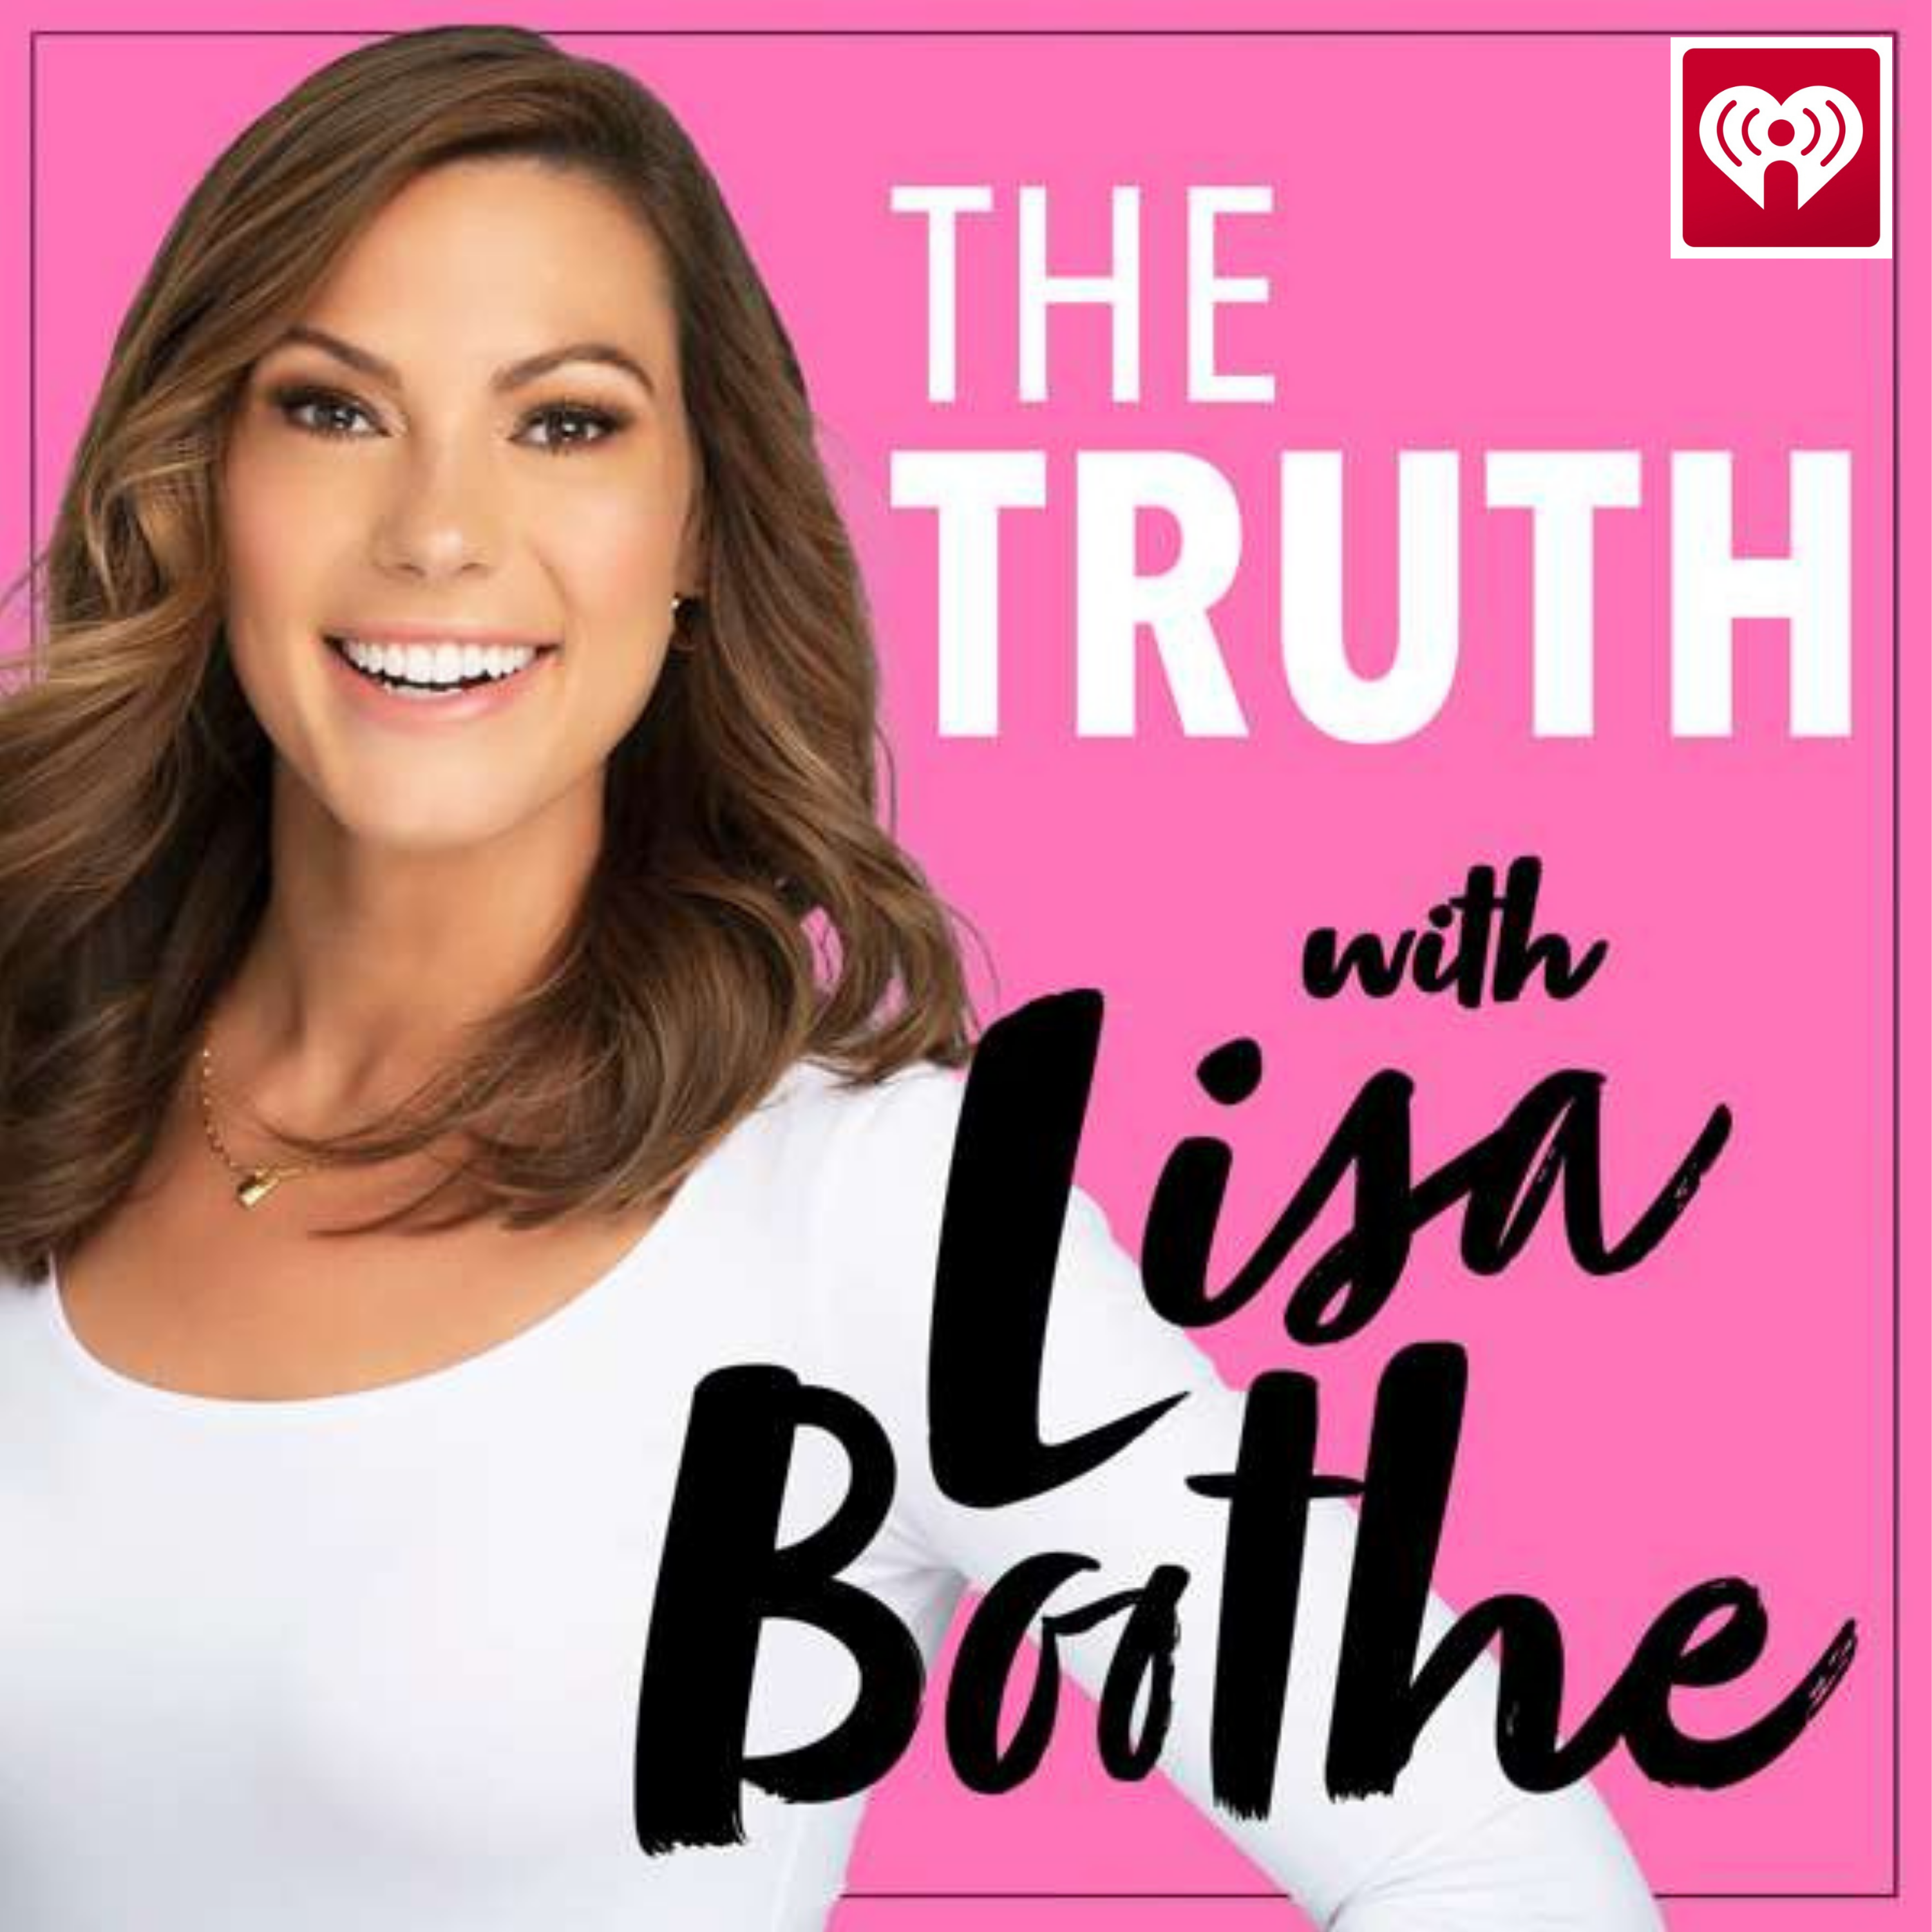 The Truth with Lisa Boothe: Court Cases & Caucusing with Matt Whitaker